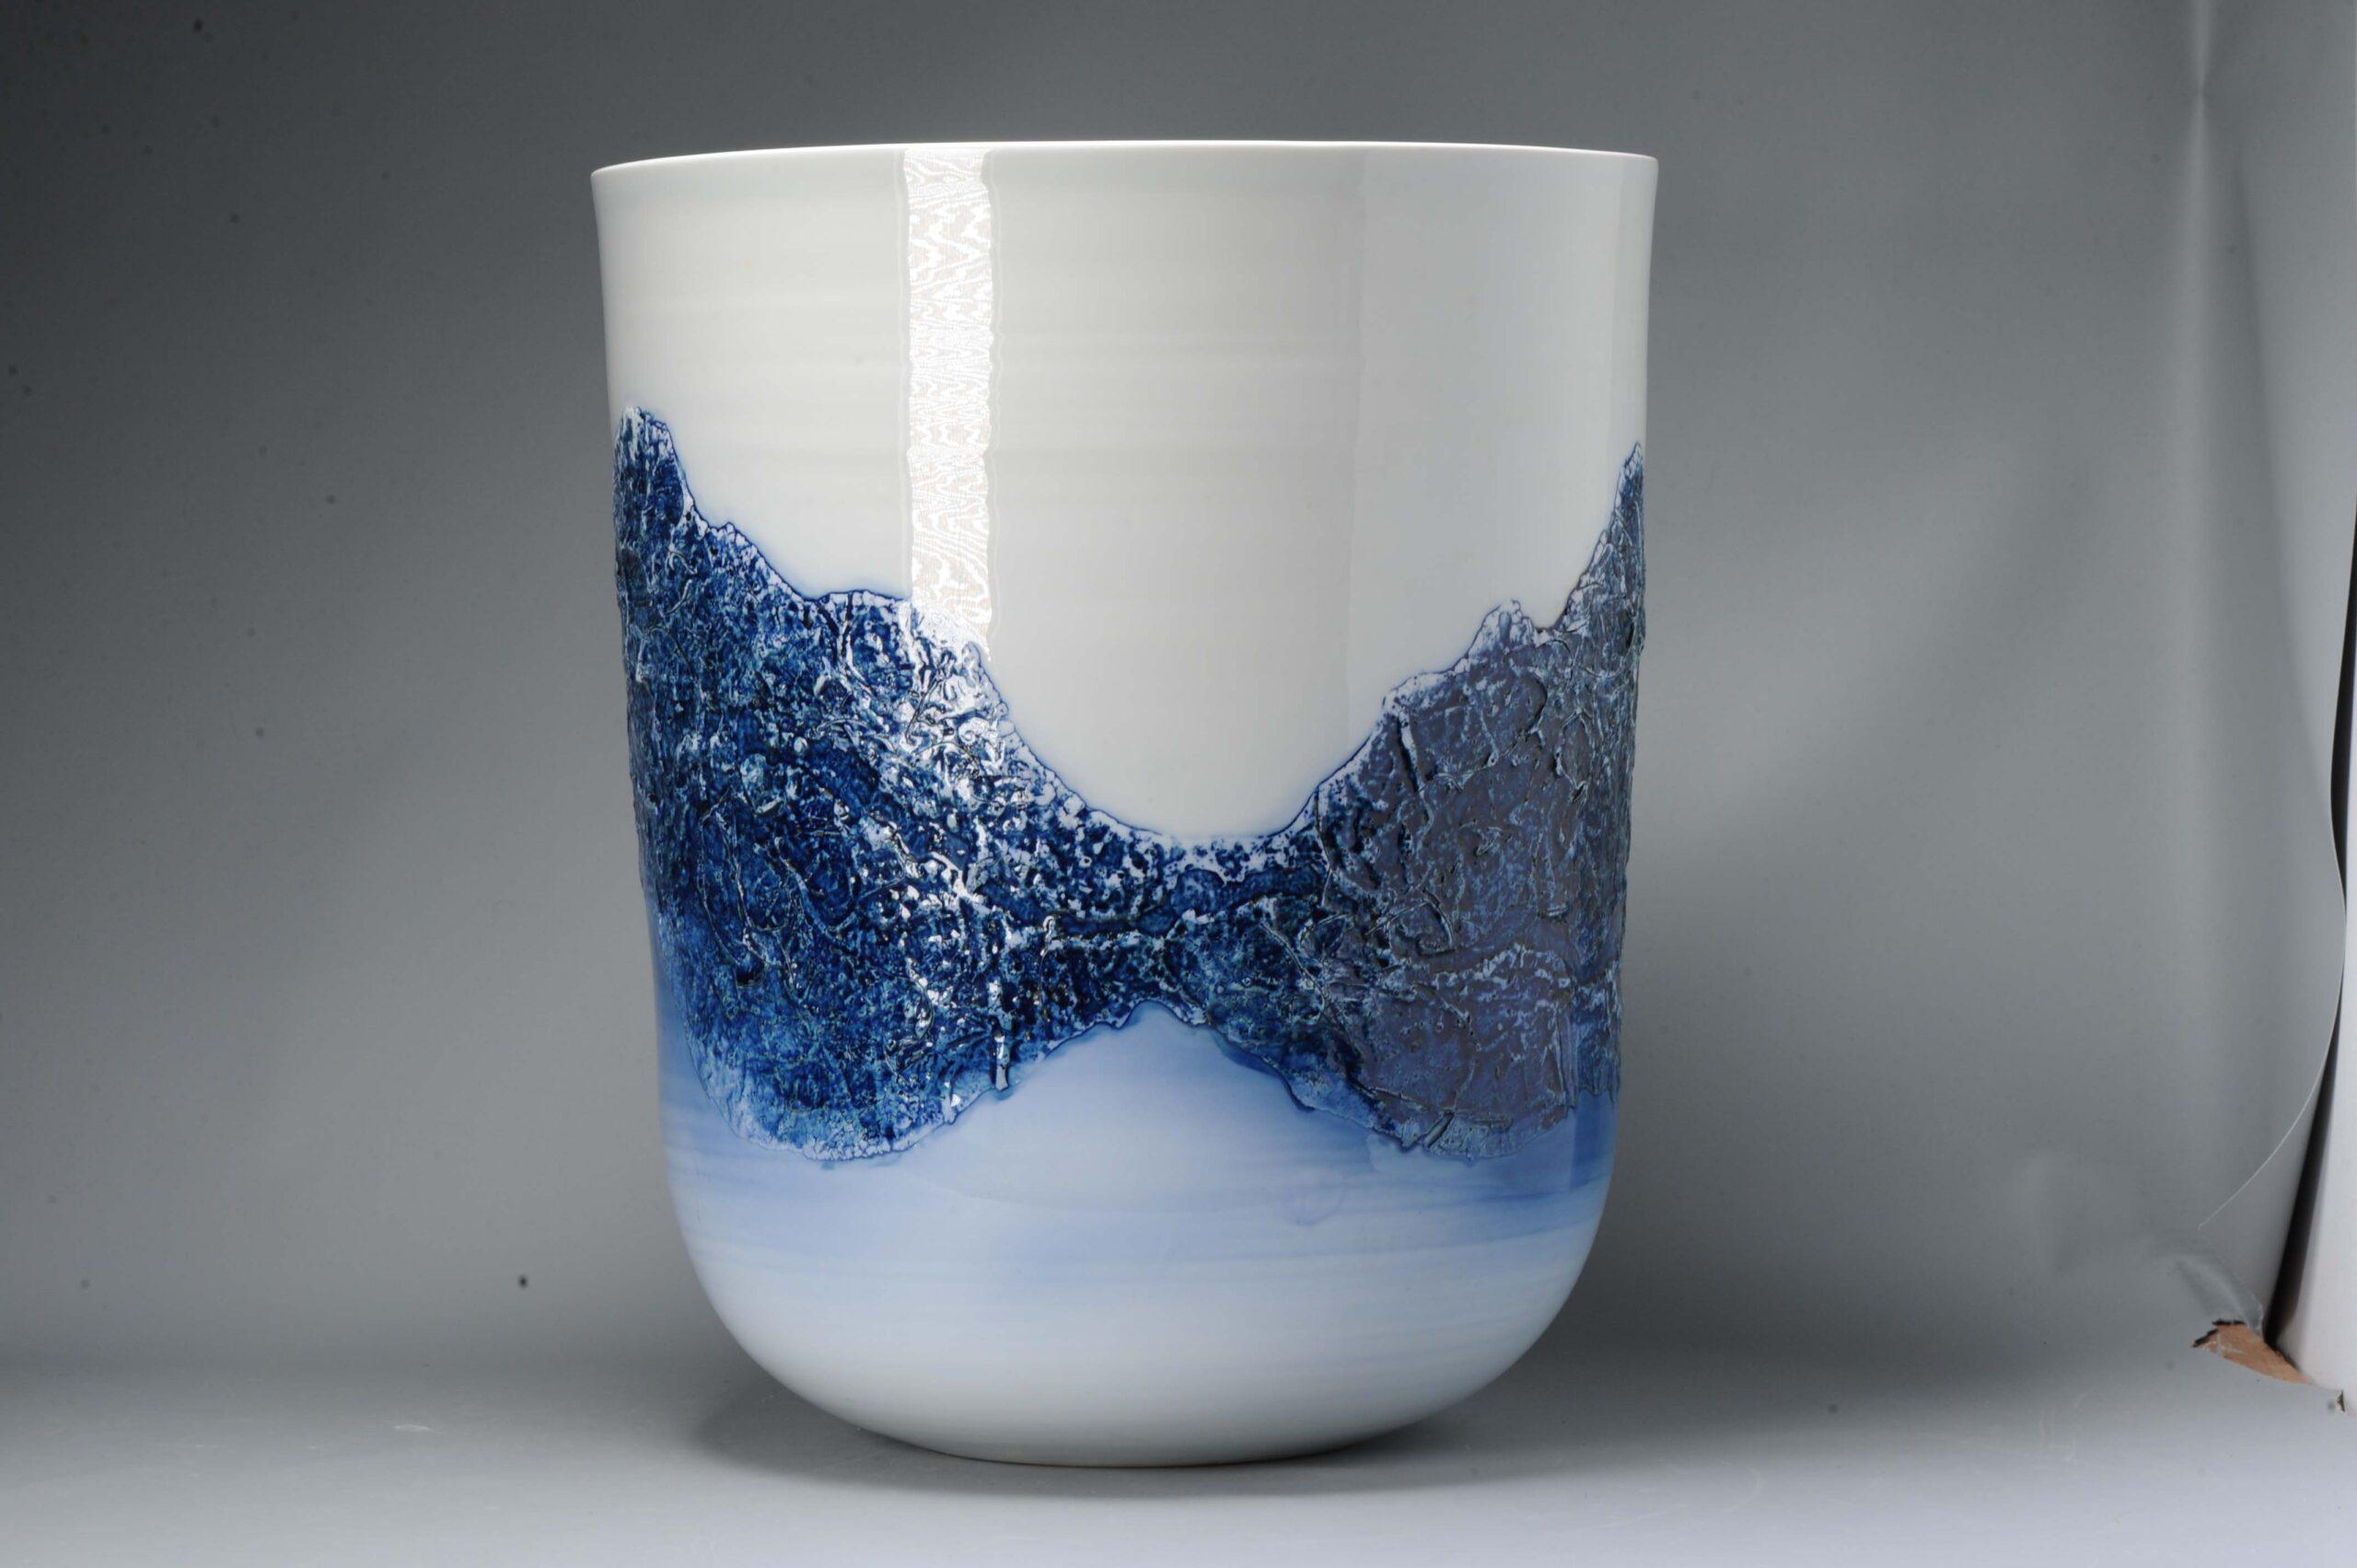 The Arita landscape is depicted in this work, as Mr. Aki Fujii imagined in his mind. It has a scene of Mountains in relief. The pot is 39cm high and 32cm in diameter or 15.35 inches high and 12.60 inches in diameter, and it is a true masterpiece of